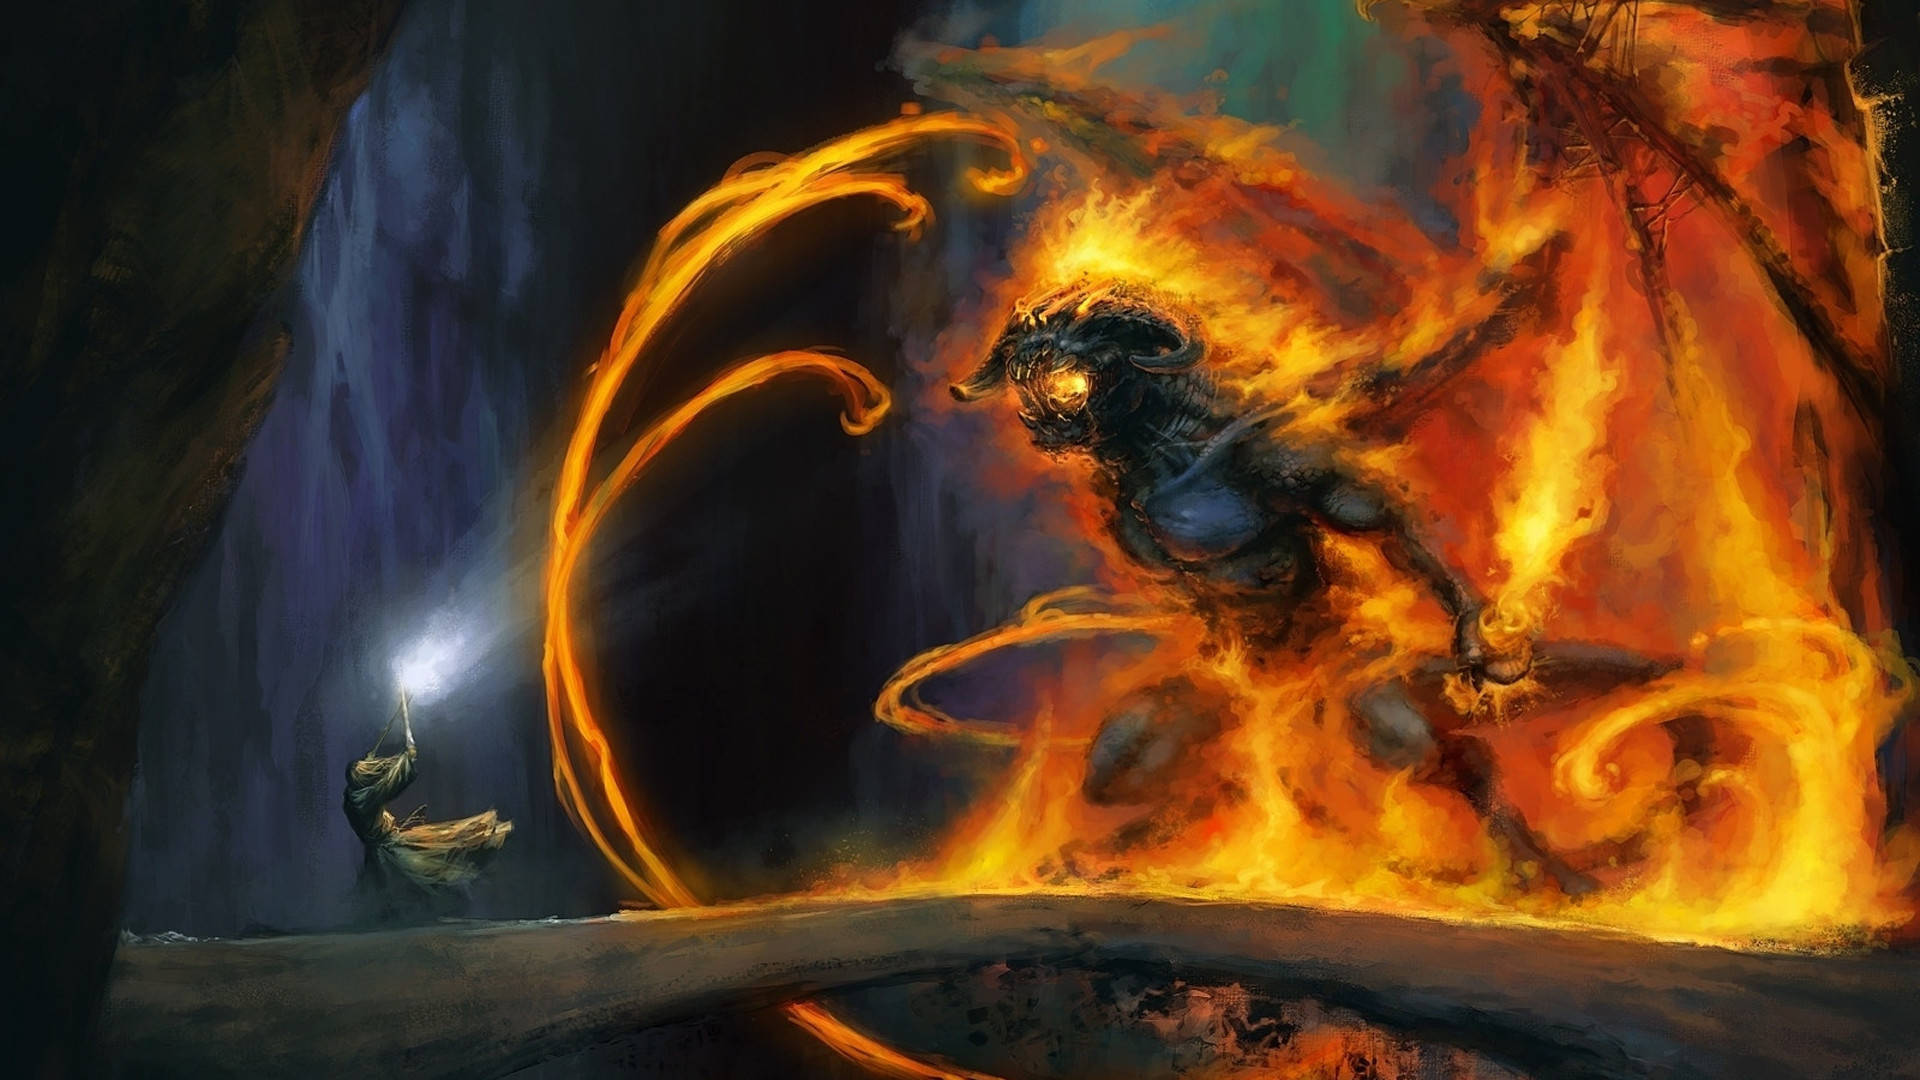 Lord Of The Rings Balrog Nerd Wallpaper